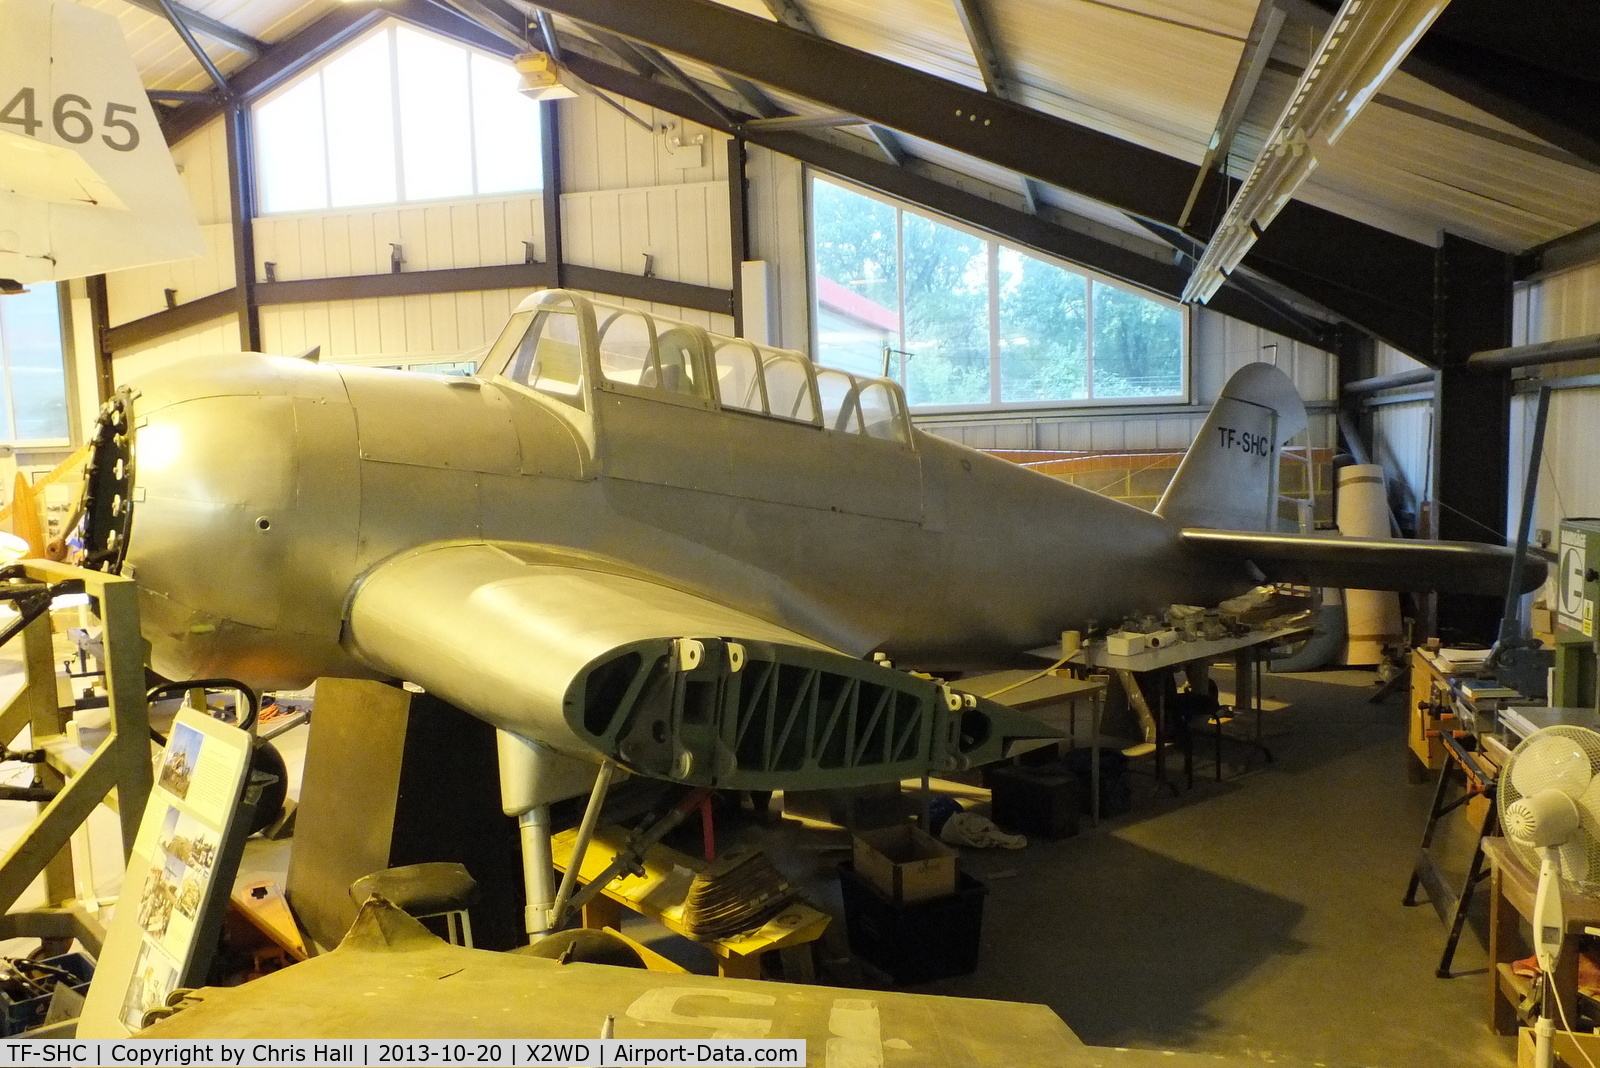 TF-SHC, 1943 Miles M.25 Martinet TT.1 C/N MS902, It crashed at Kopasker in the far North-East of Iceland in 1951 and the wreckage remained there until 1977, when it was moved to Reykjavik Airport by The Icelandic Aviation Historical Society and put into covered storage. Moving to Woodley in 1996.